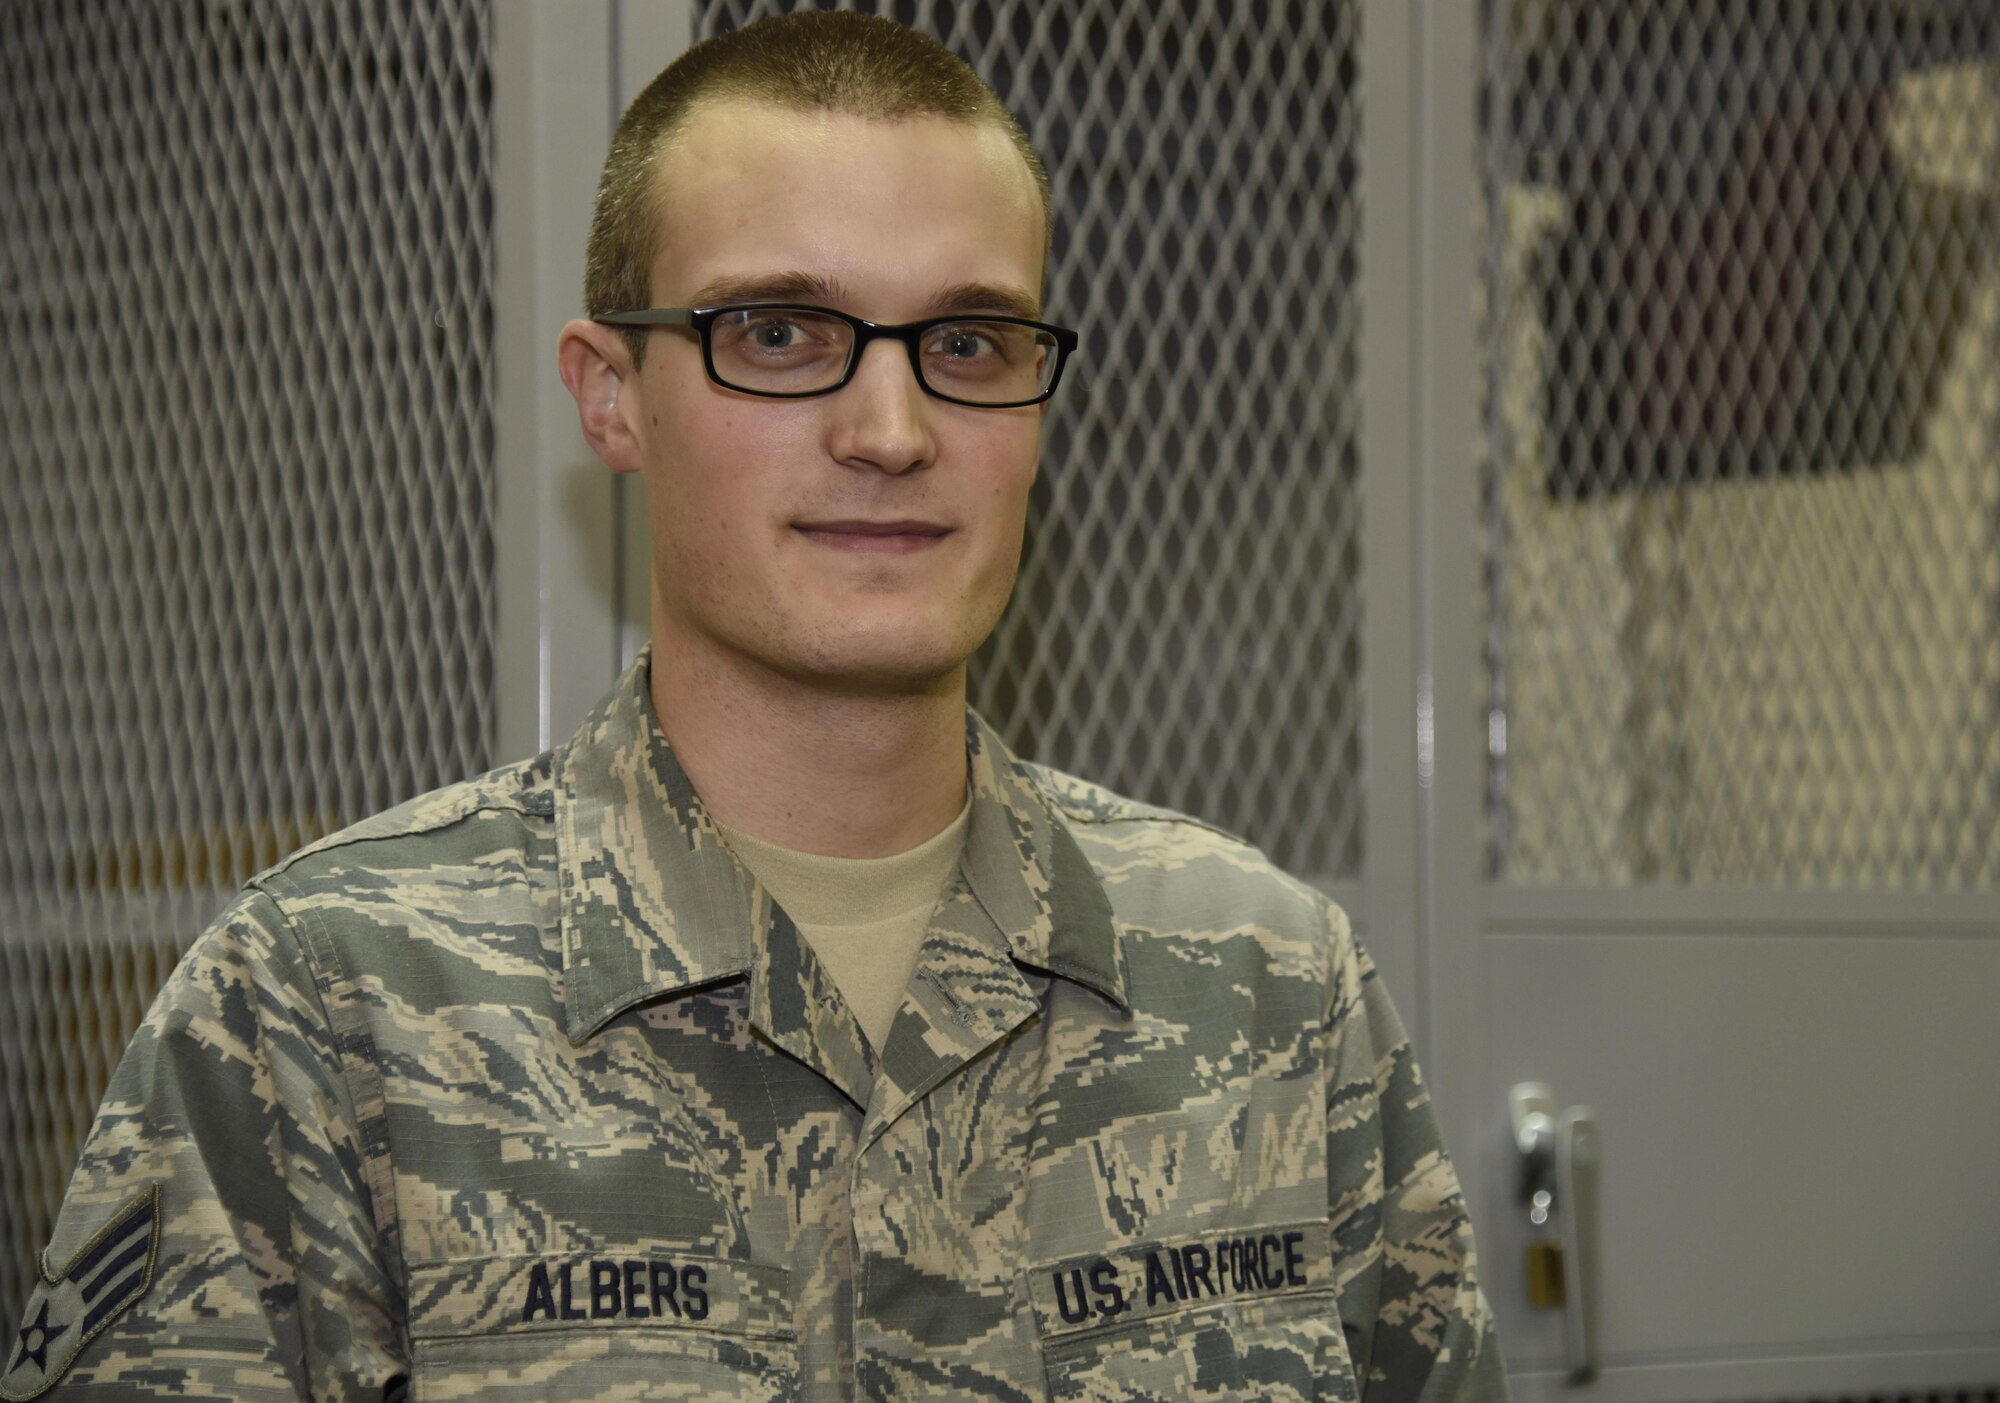 U.S. Air Force Senior Airman Benjamin Albers, a contracting specialist with the 35th Contracting Squadron, poses for a photo portrait at Misawa Air Base, Japan, June 15, 2016. Albers was recognized as the Wild Weasel of the Week by the 35th CONS for his superior performance, outstanding work ethic, and overall good conduct and discipline. Albers is from Rochester, Minnesota. (U.S. Air Force photo by Airman 1st Class Jordyn Fetter)